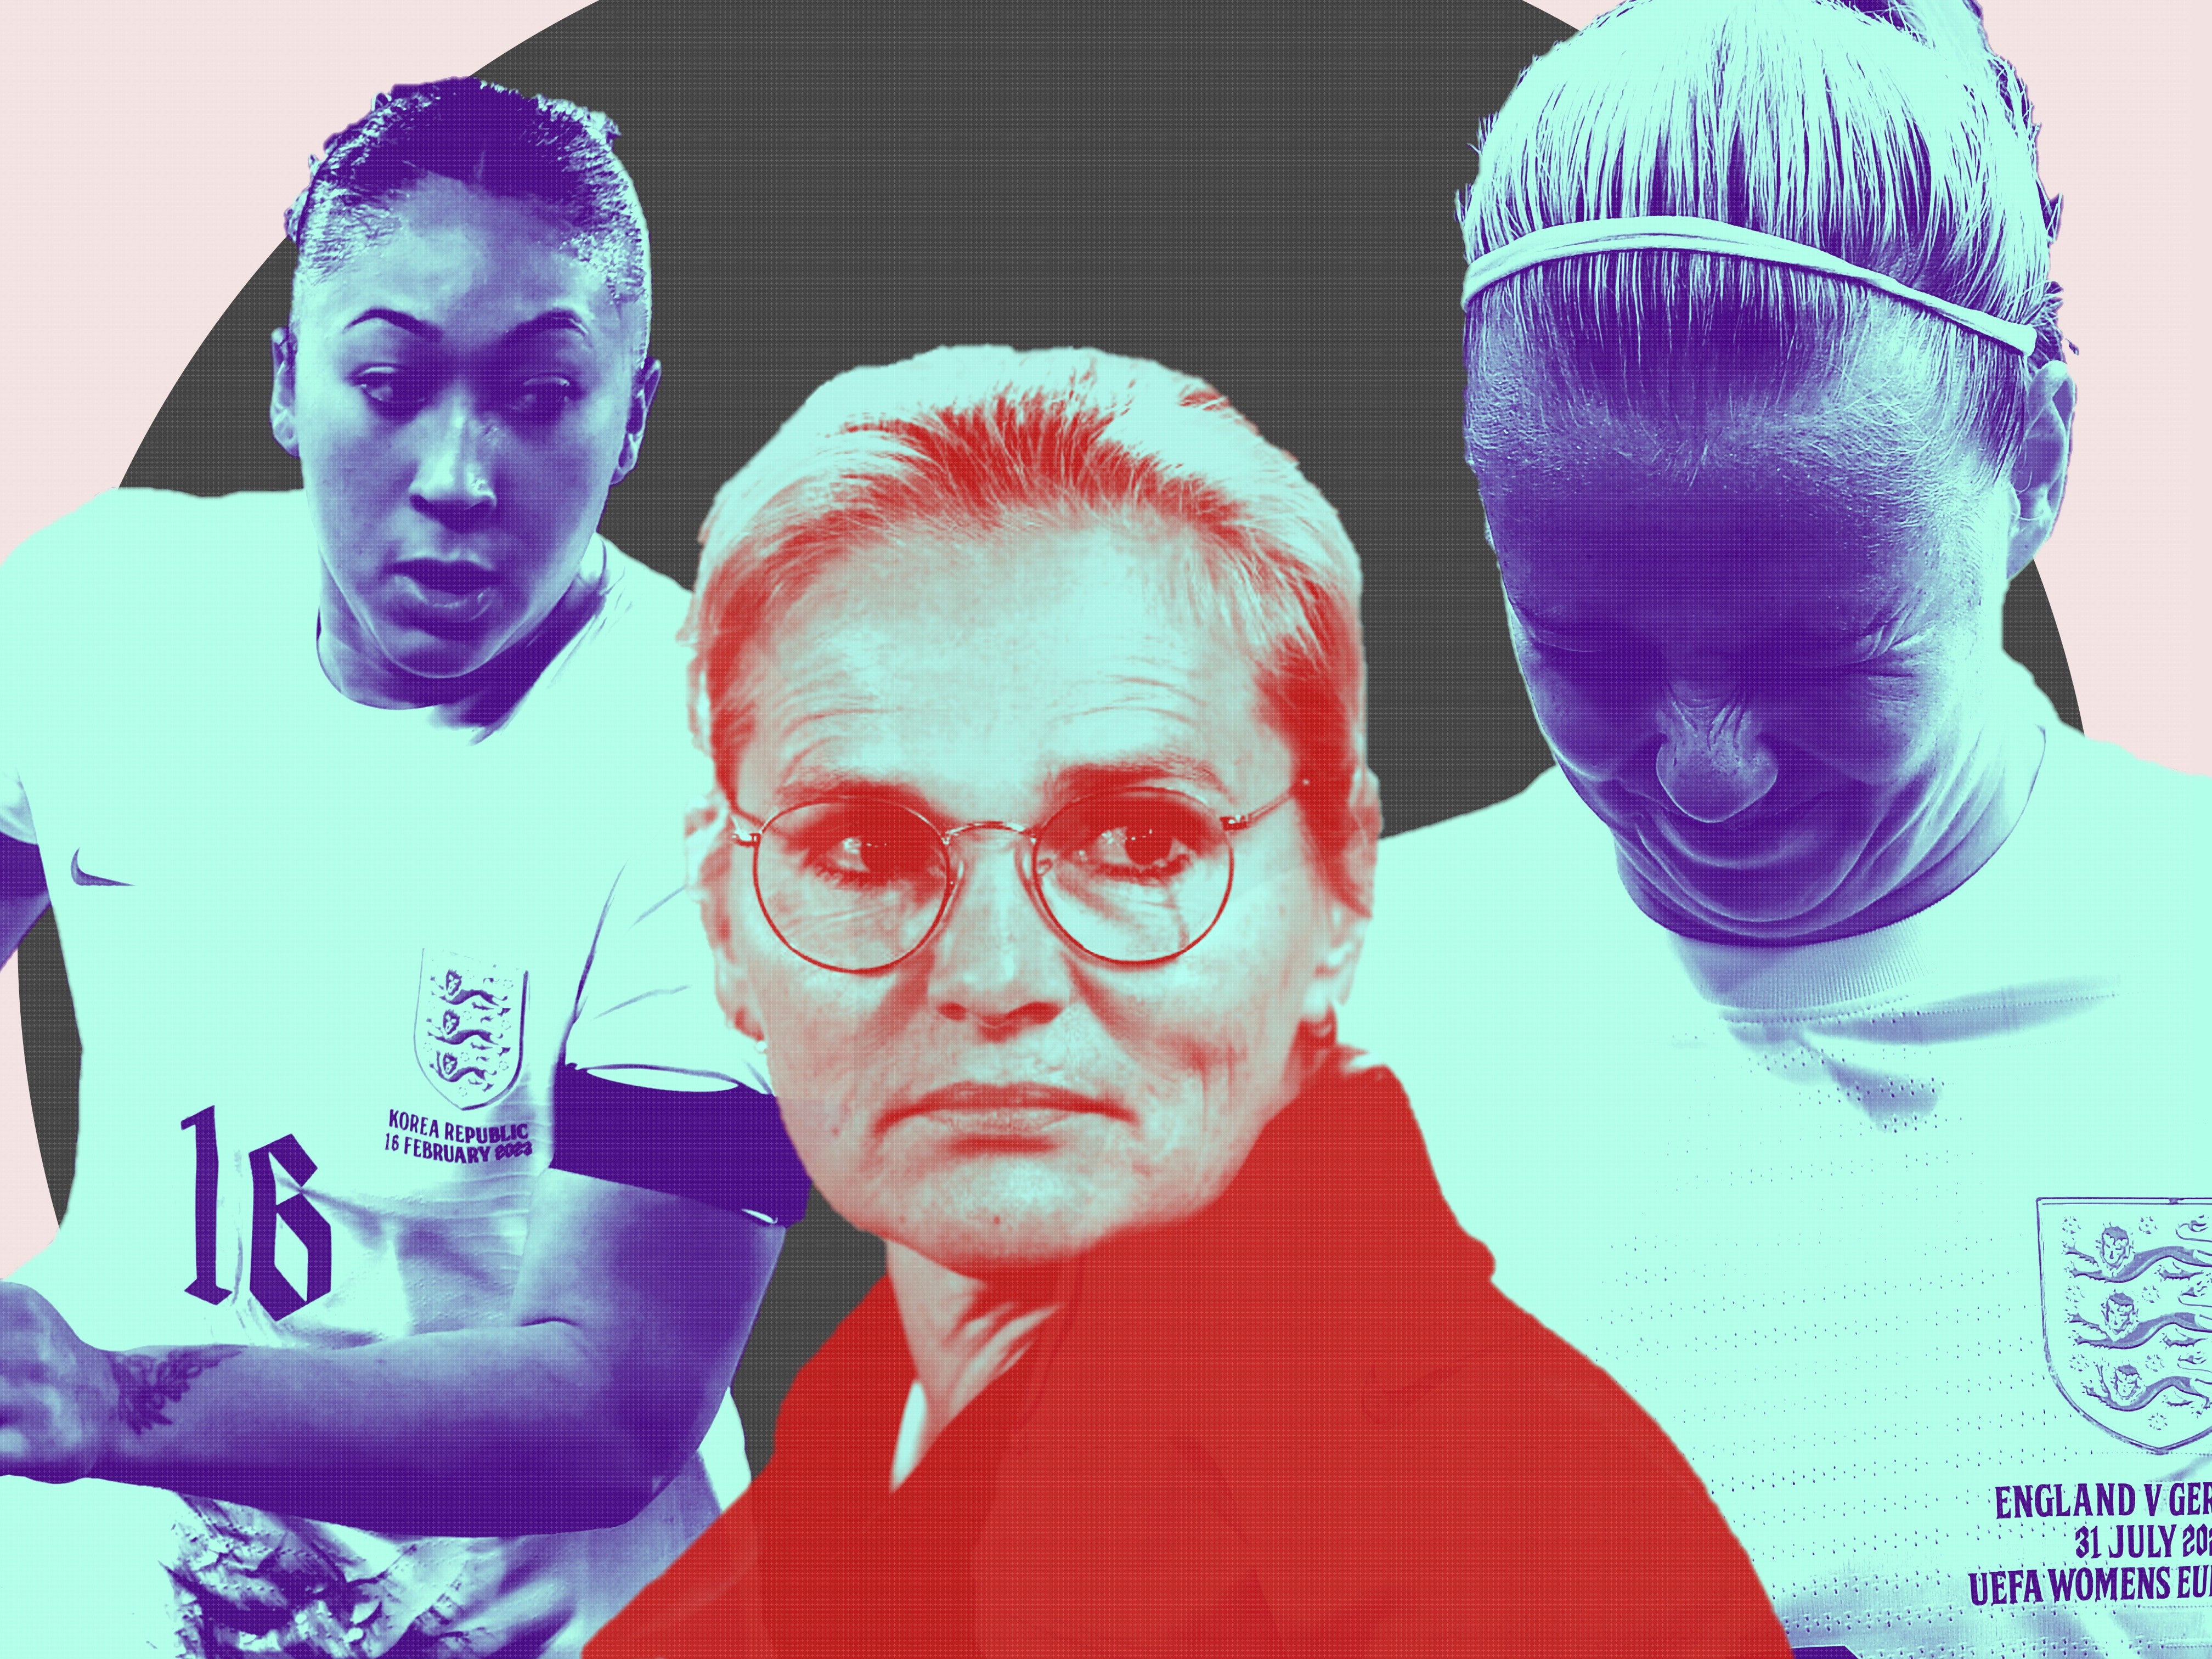 Sarina Wiegman has some big choices to make ahead of the World Cup